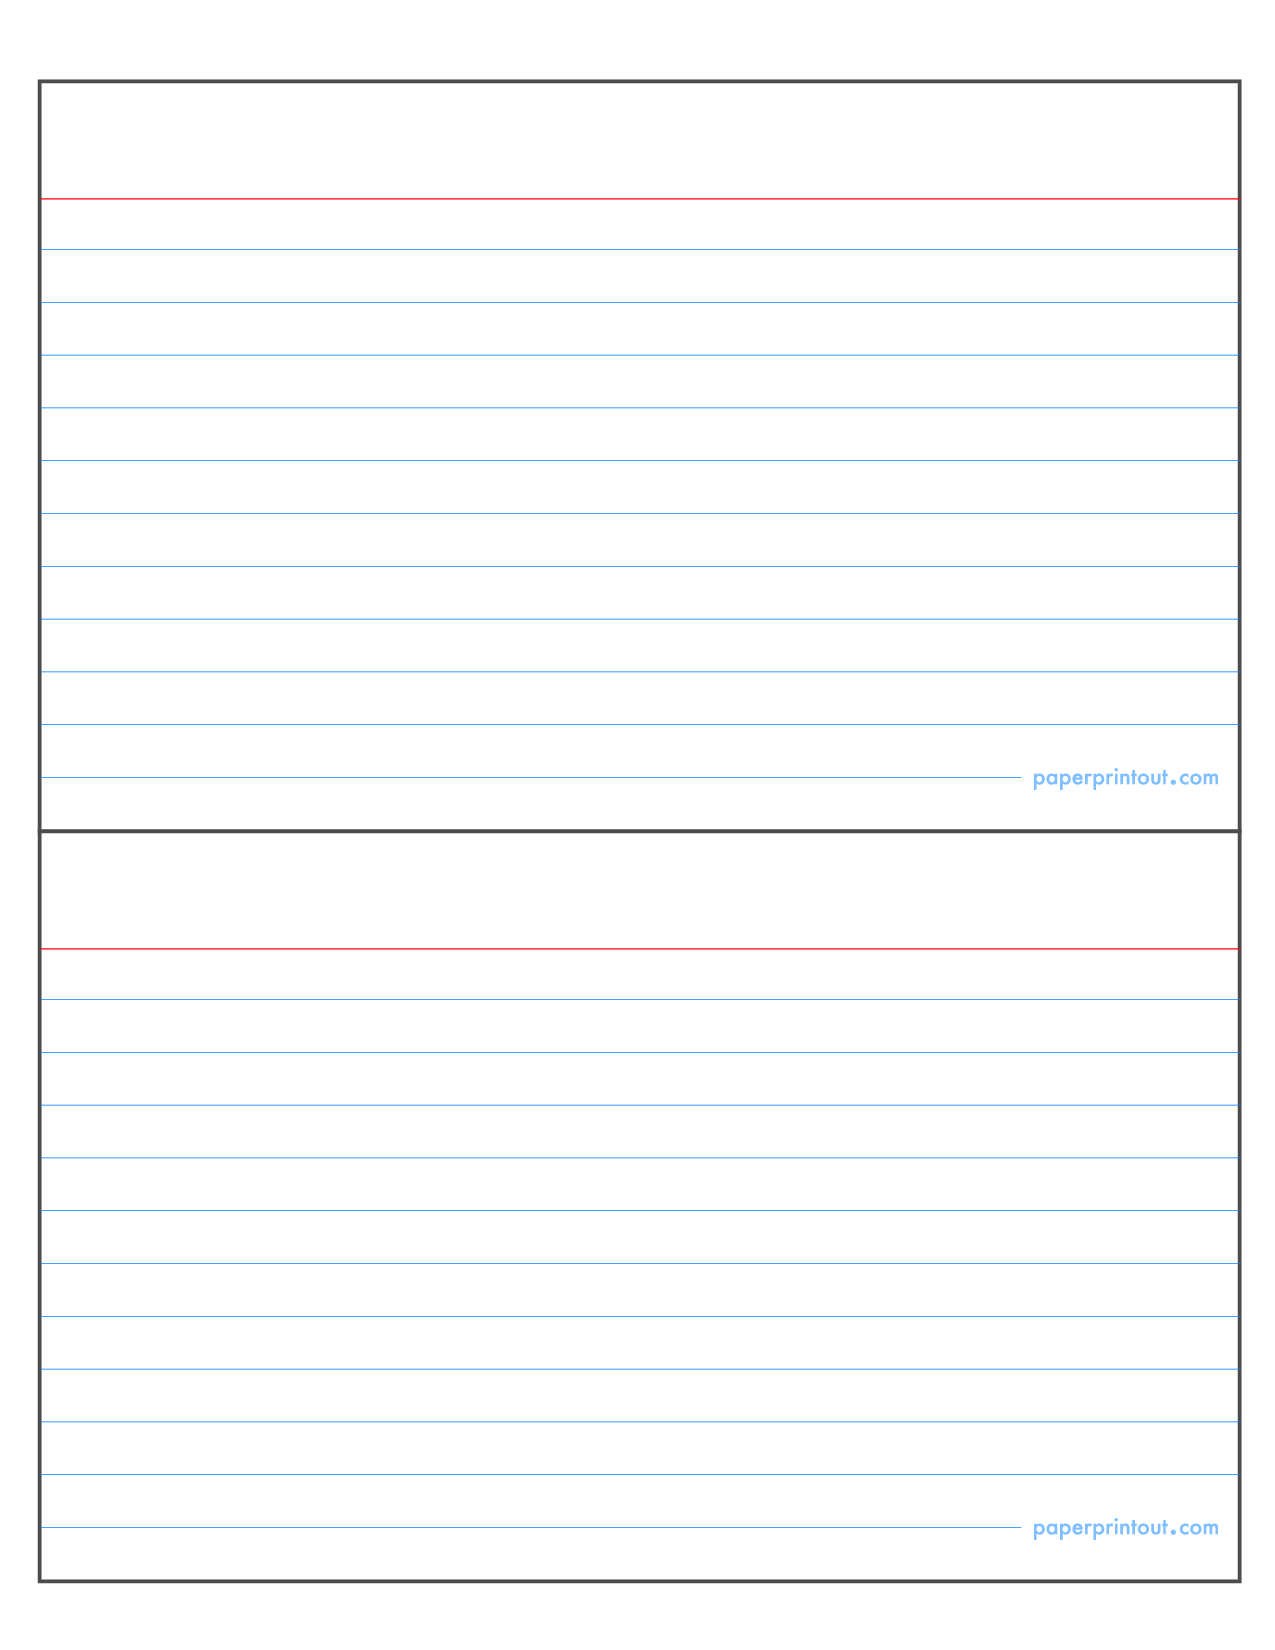 Index Card Template | E Commercewordpress Intended For 5 By 8 Index Card Template